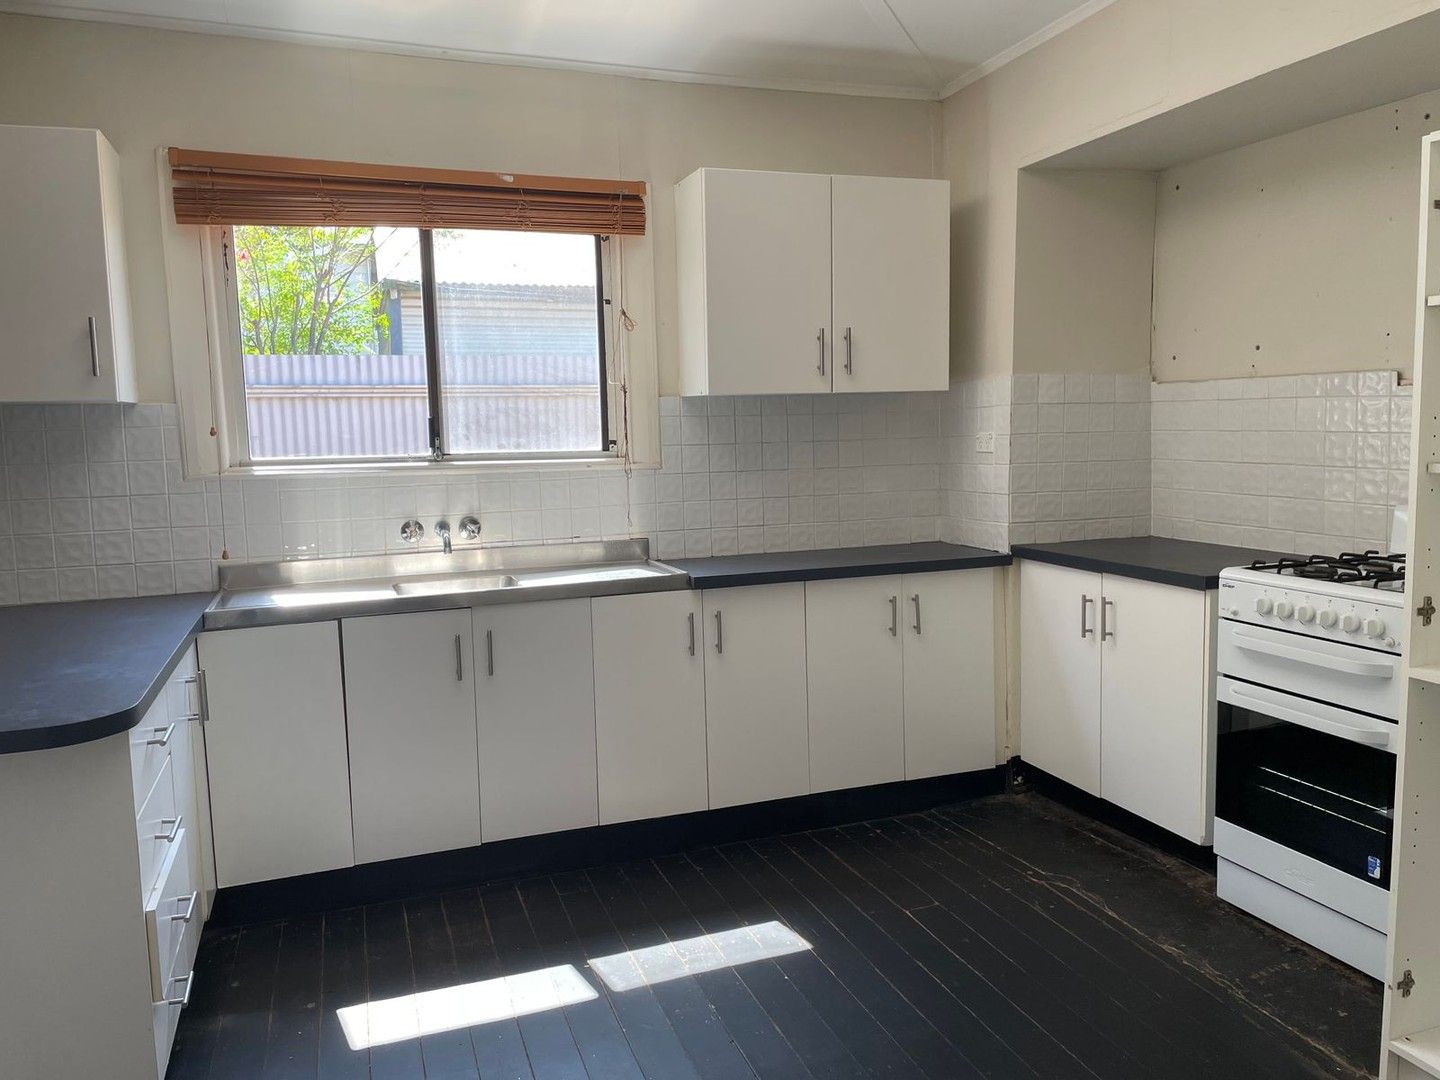 3 bedrooms Apartment / Unit / Flat in 65A Roberts Street SOUTH KALGOORLIE WA, 6430